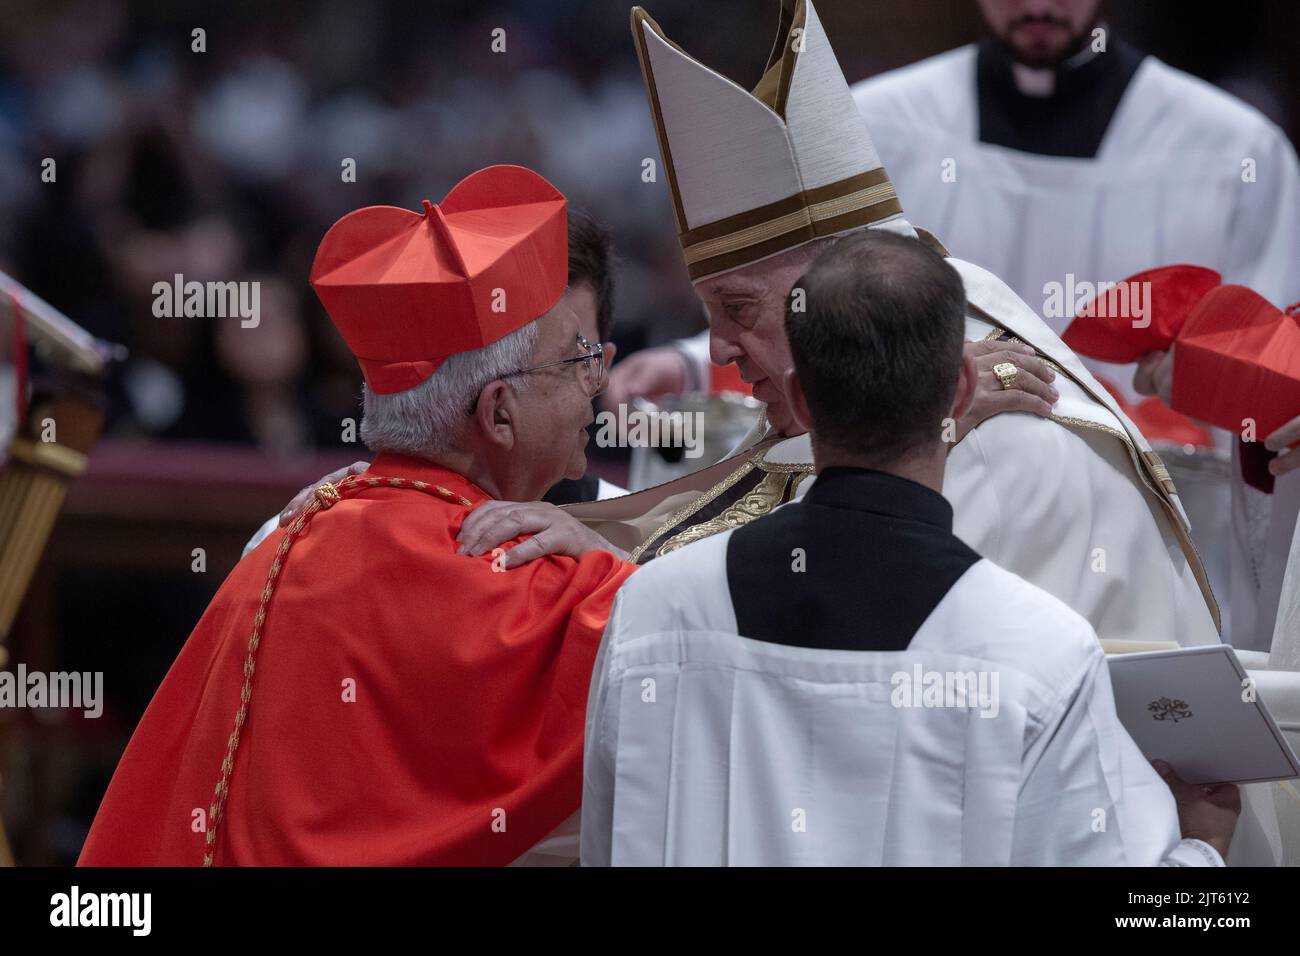 Vatican City, Vatican, 27 August 2022.   Newly appointed Cardinal Adalberto Martinez Flores, archbishop of Asuncion (Paraguay),  receives the red hat, biretta, from Pope Francis during an extraordinary consistory for the creation of 21 Cardinals, in St. Peter's Basilica. Credit: Maria Grazia Picciarella/Alamy Live News Stock Photo